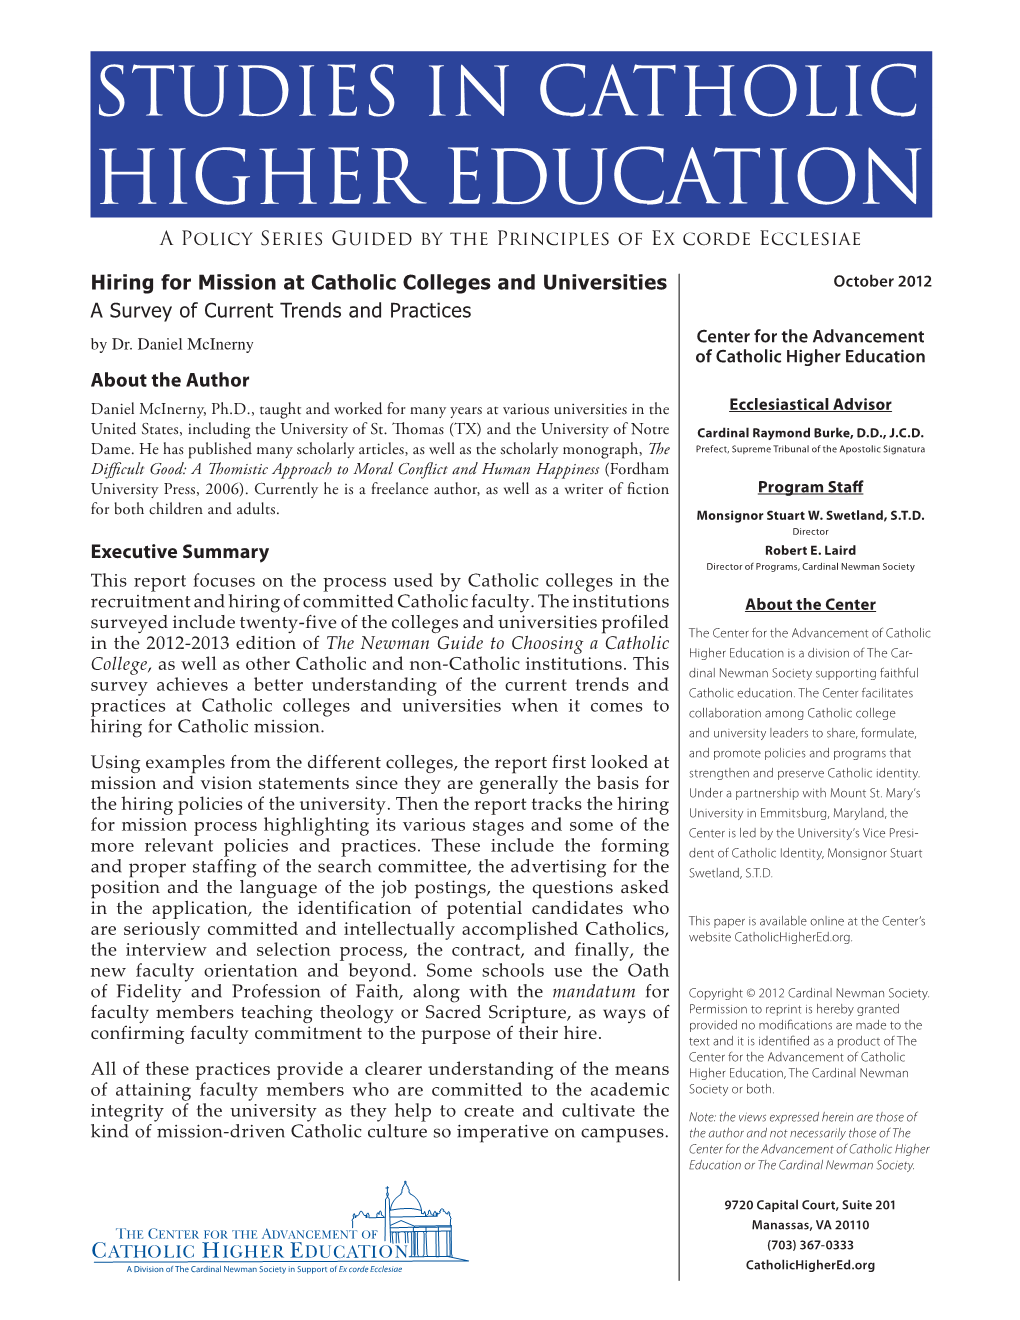 HIGHER EDUCATION a Policy Series Guided by the Principles of Ex Corde Ecclesiae